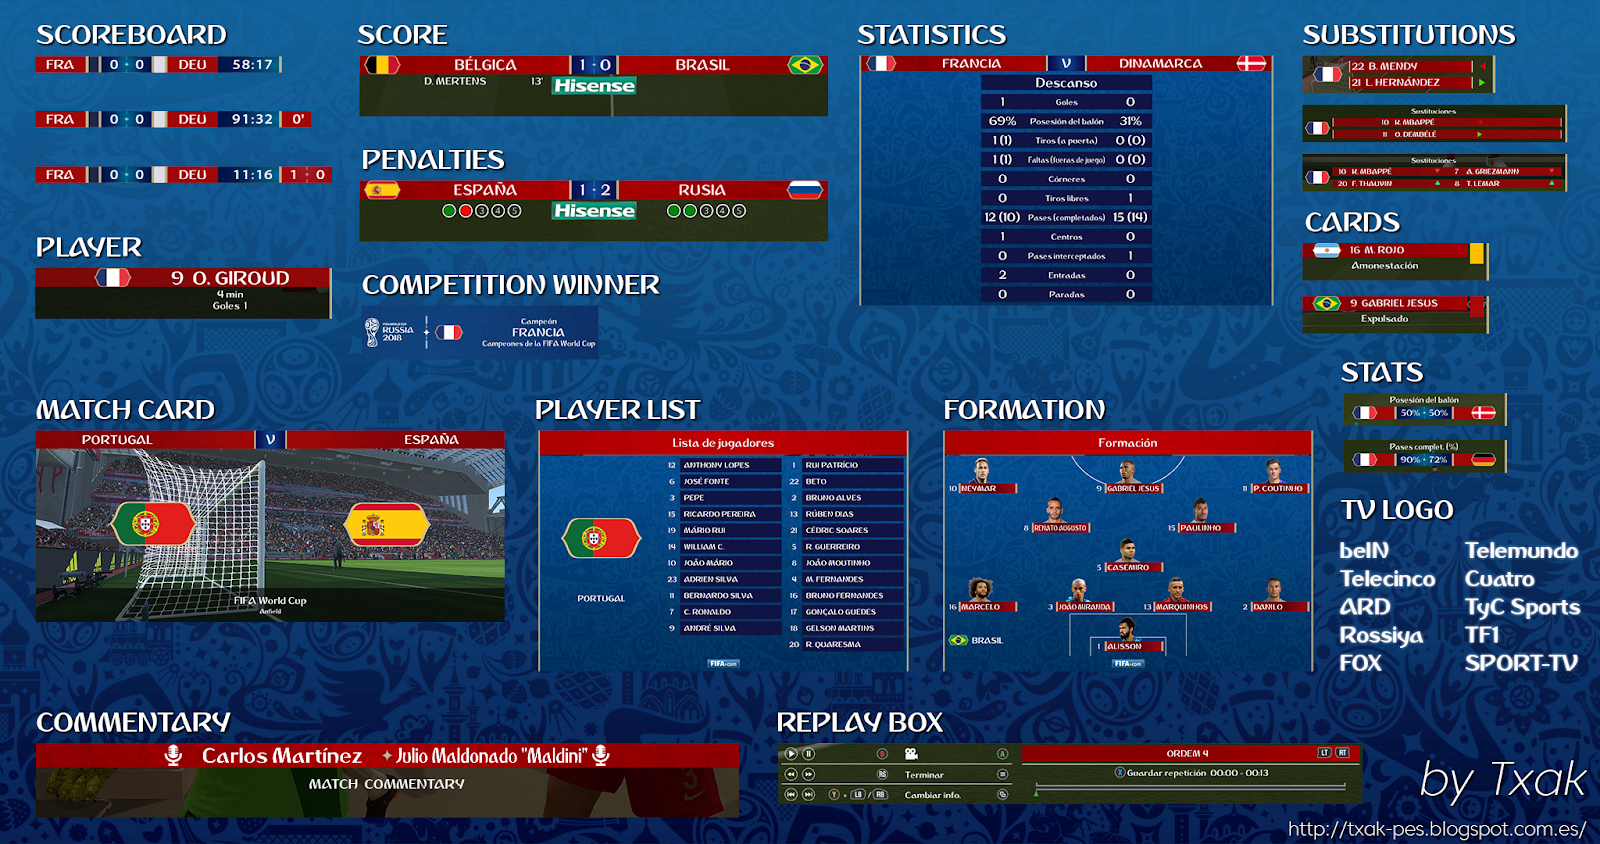 PES 2018 Scoreboard FIFA World Cup Russia 2018 v2 by Txak ~ PESNewupdate Free Download Latest Pro Evolution Soccer Patch and Updates